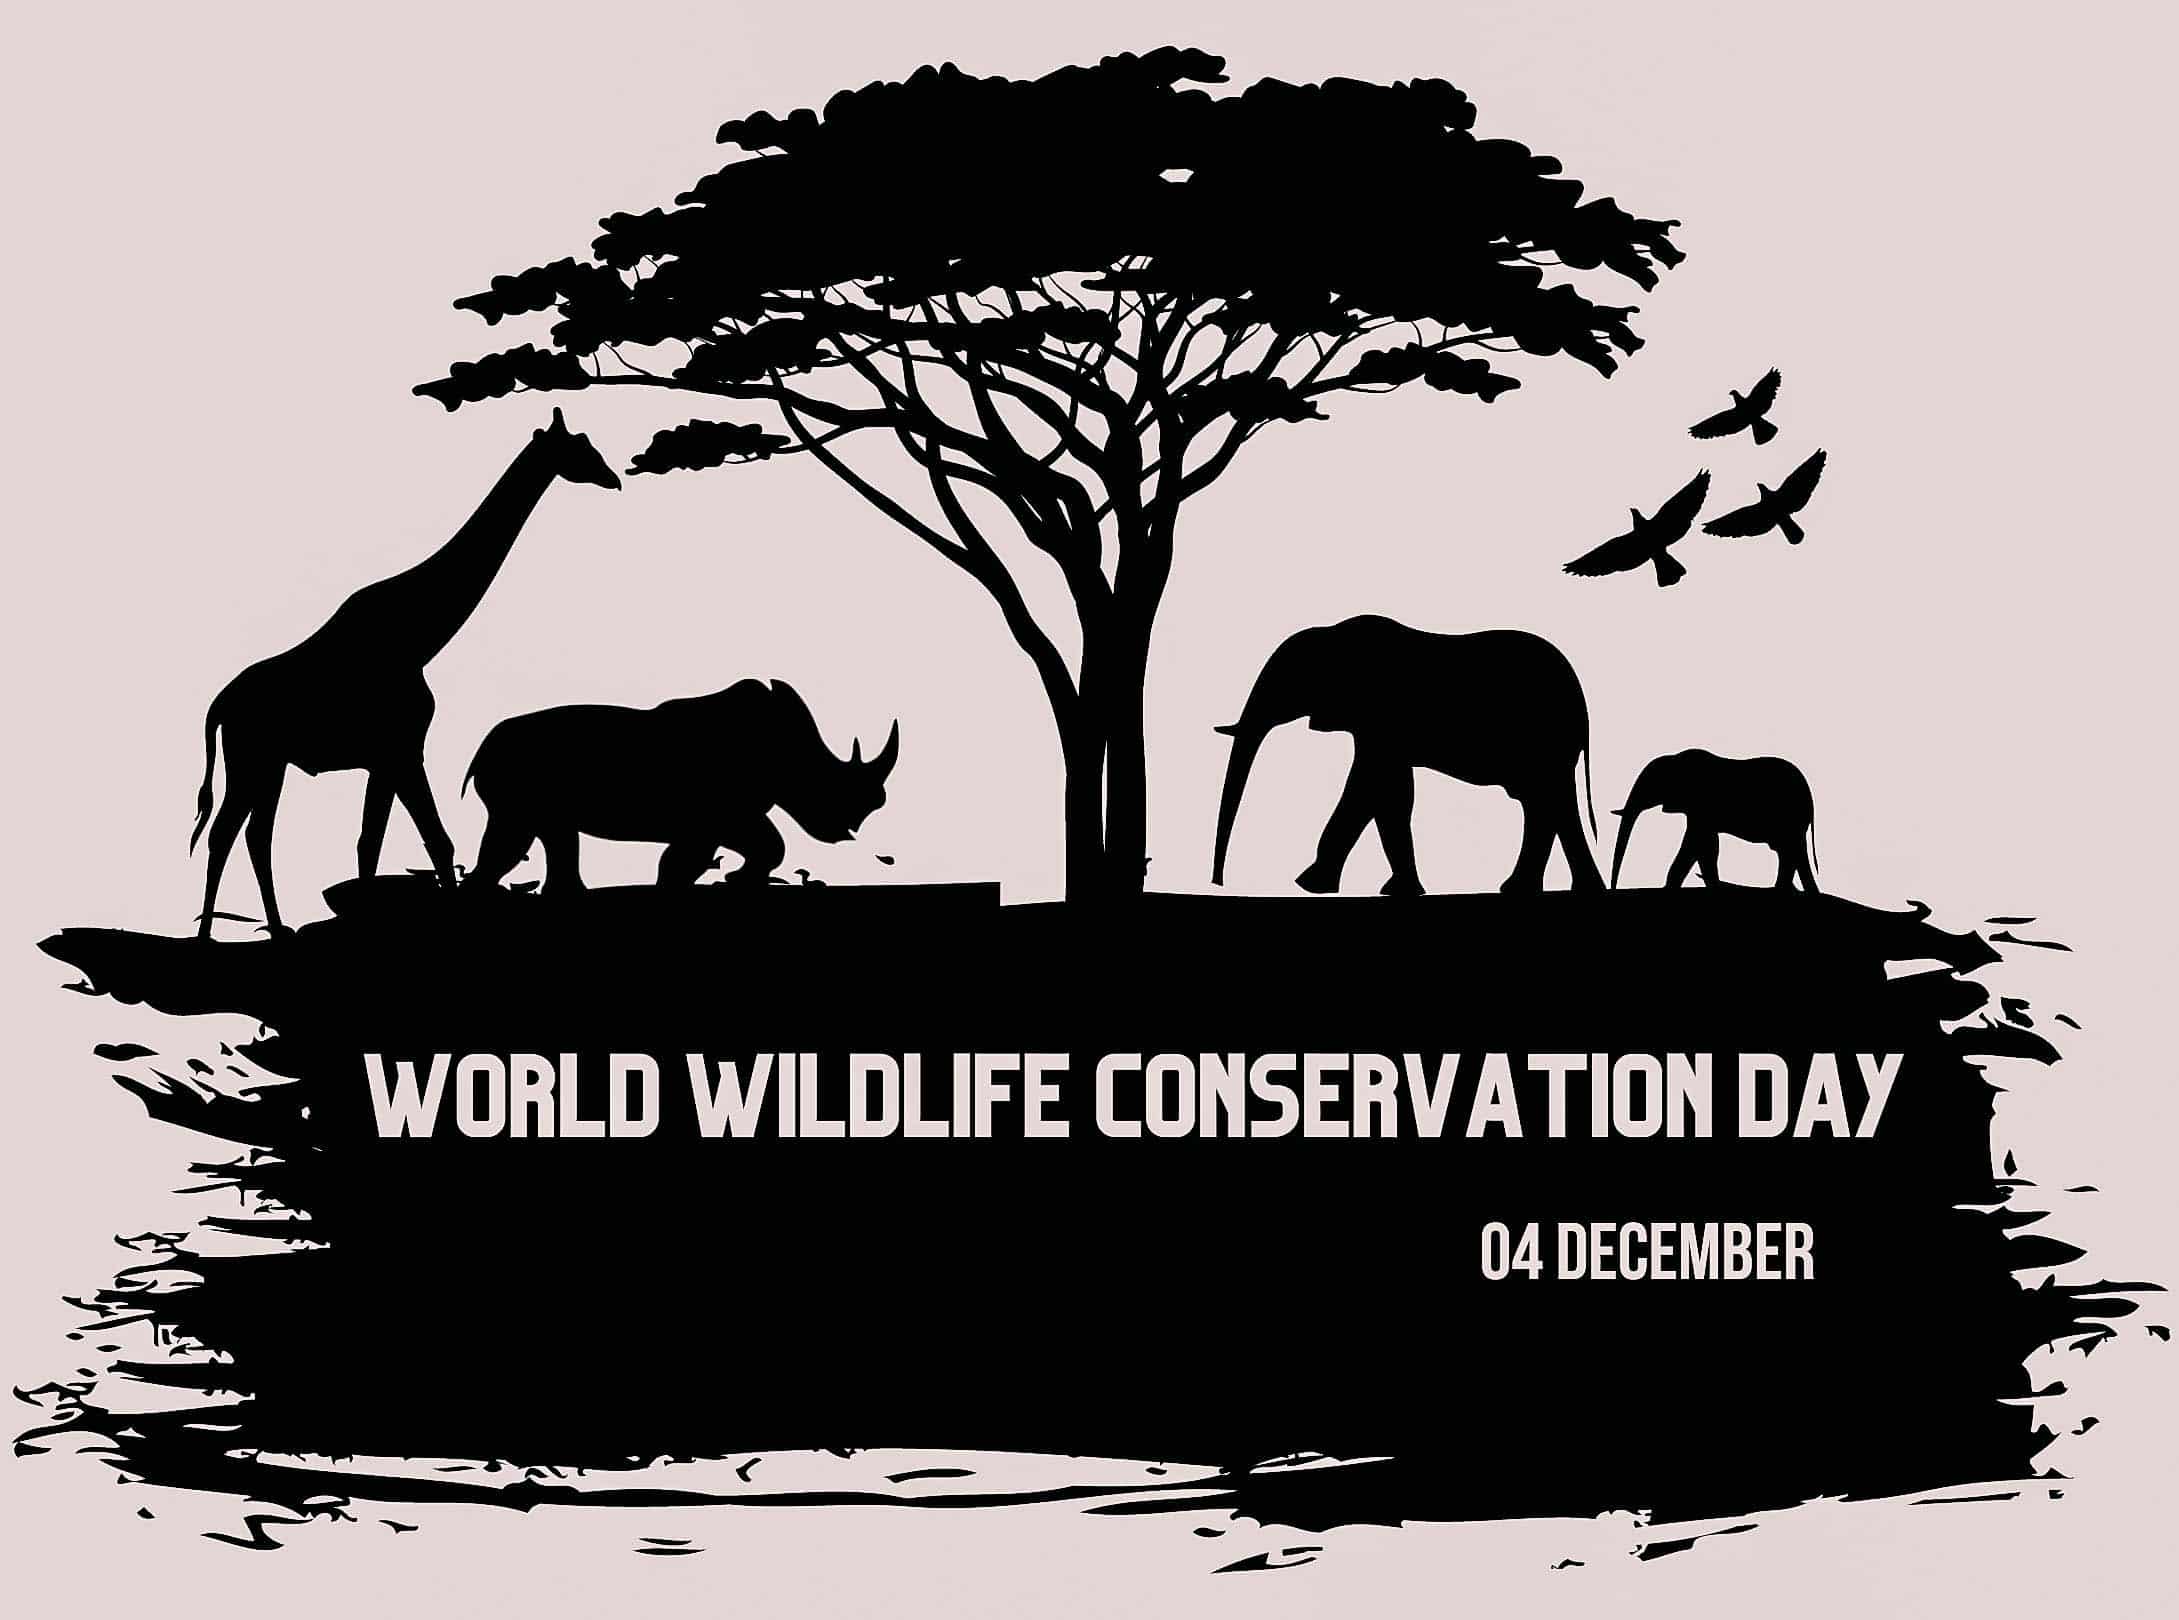 World Wildlife Conservation Day Search Wizards, Inc.